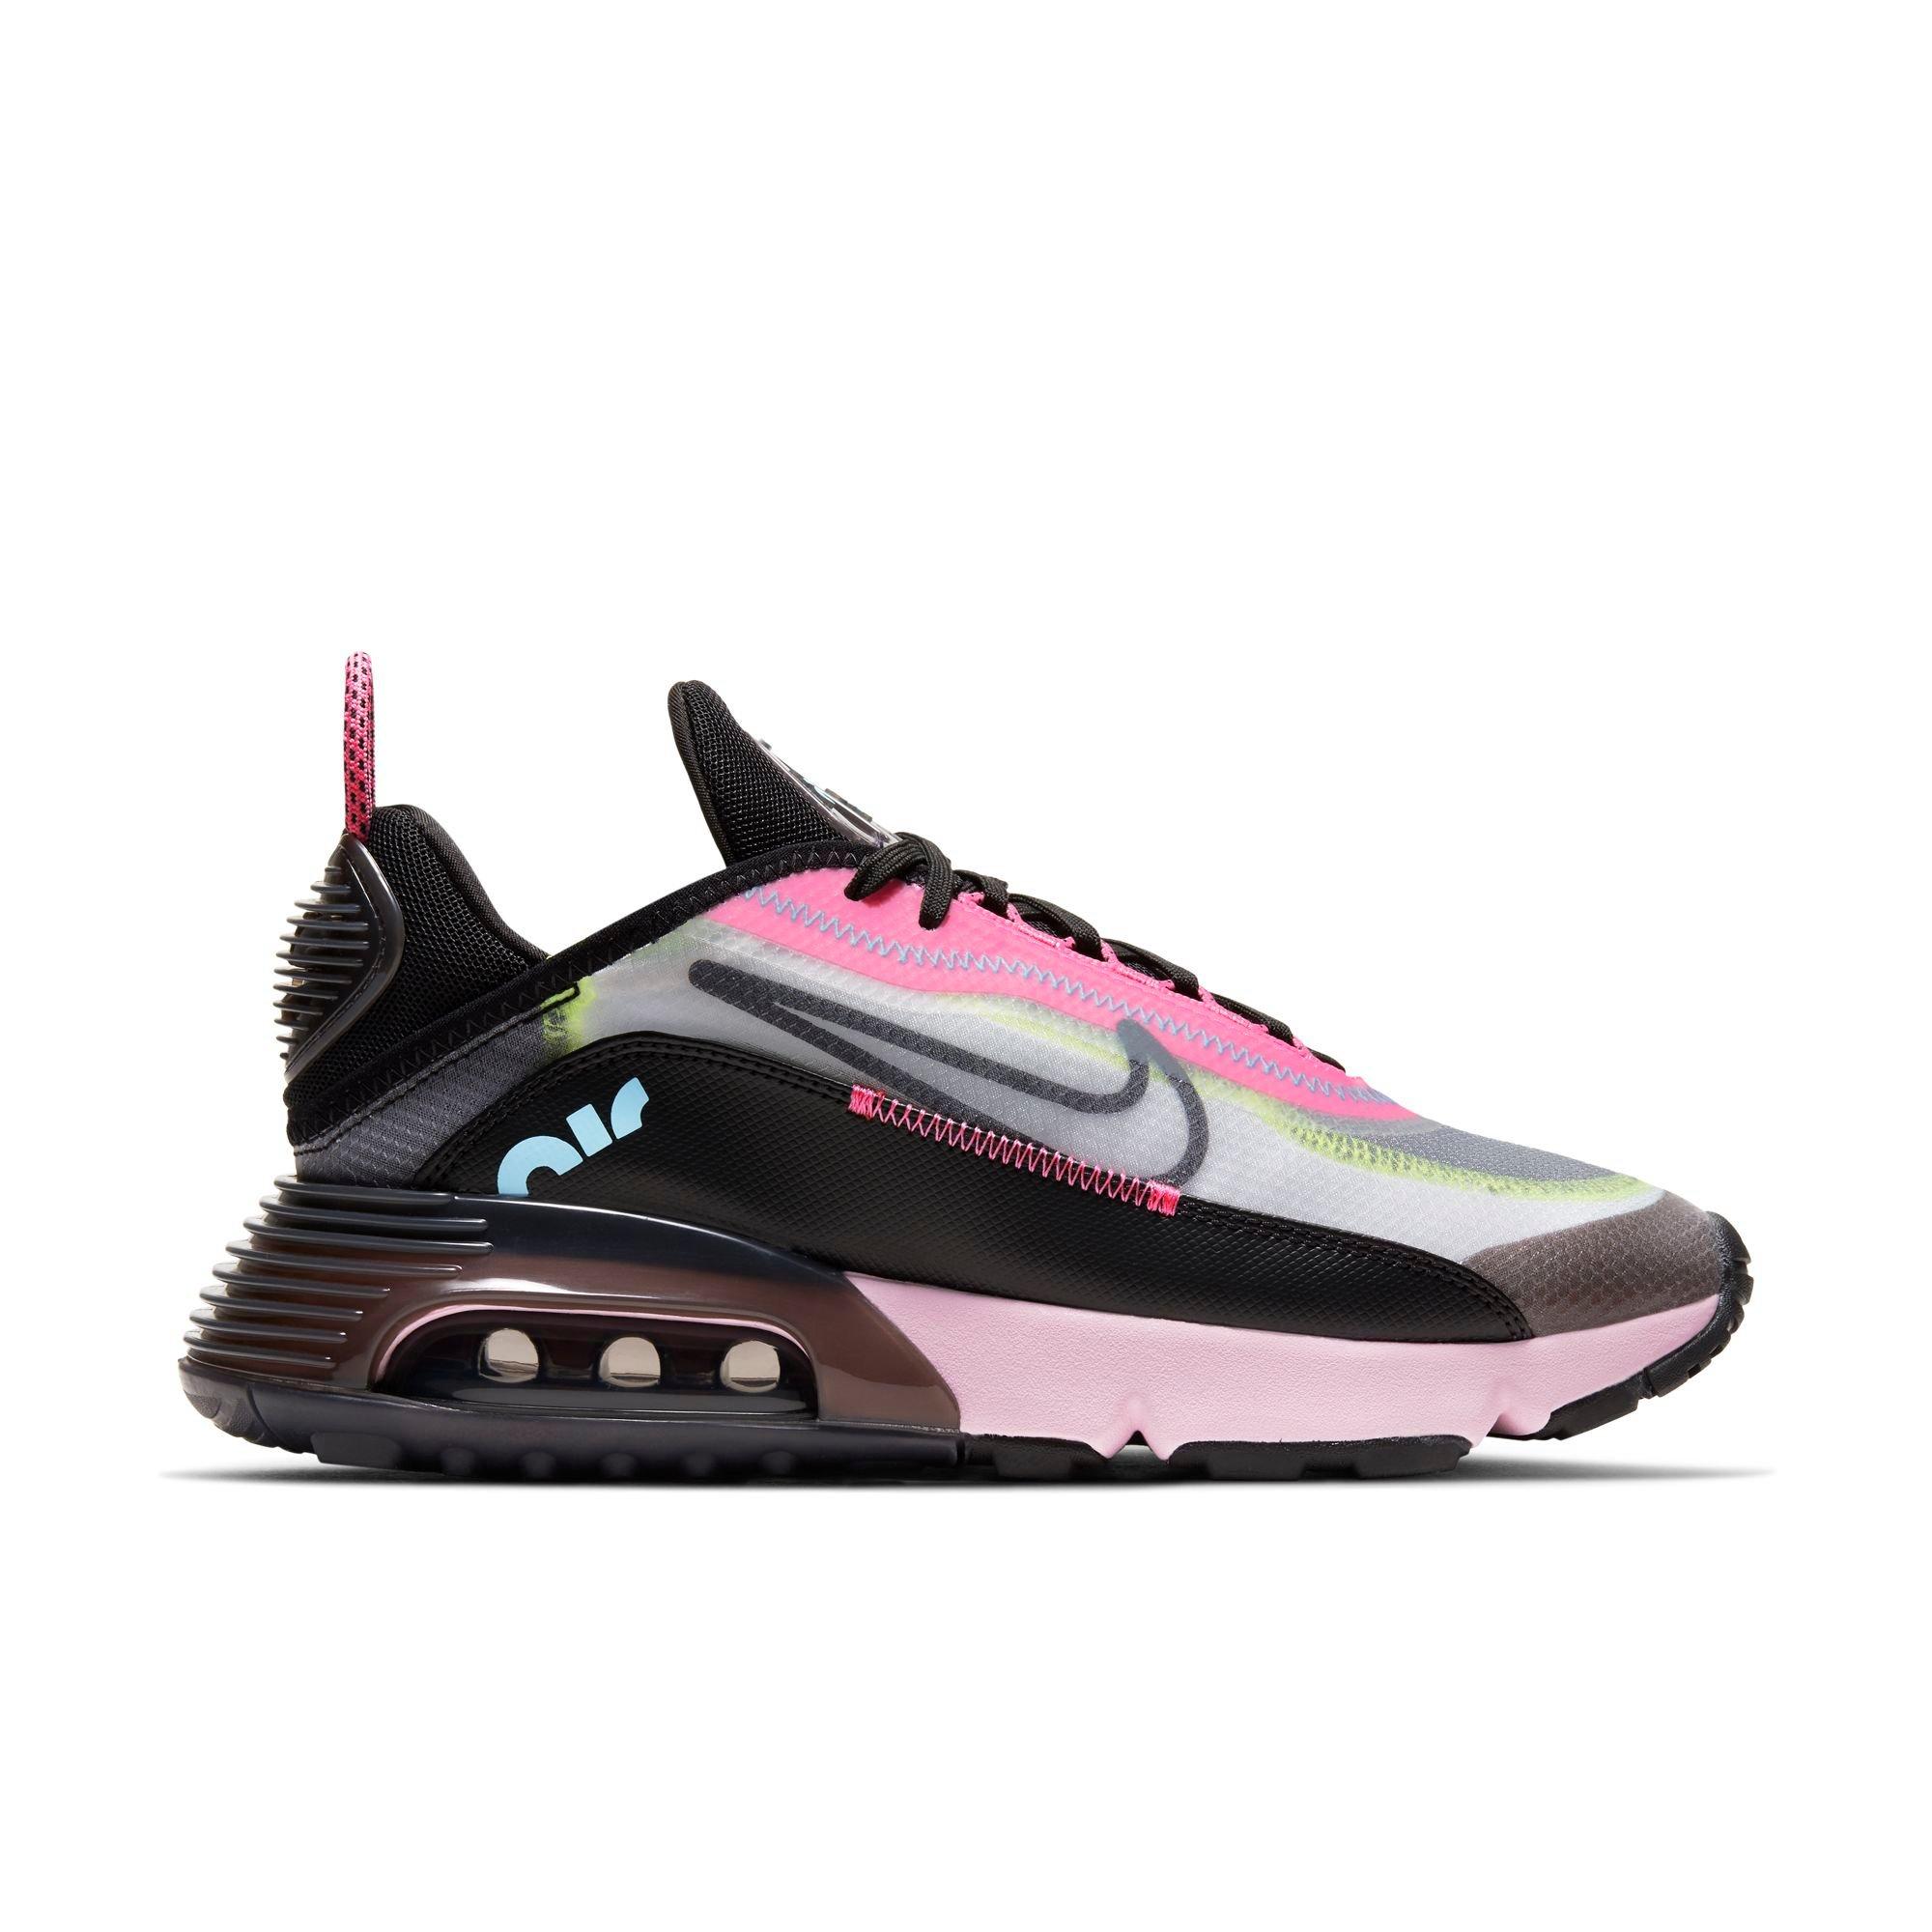 women's pink air max shoes